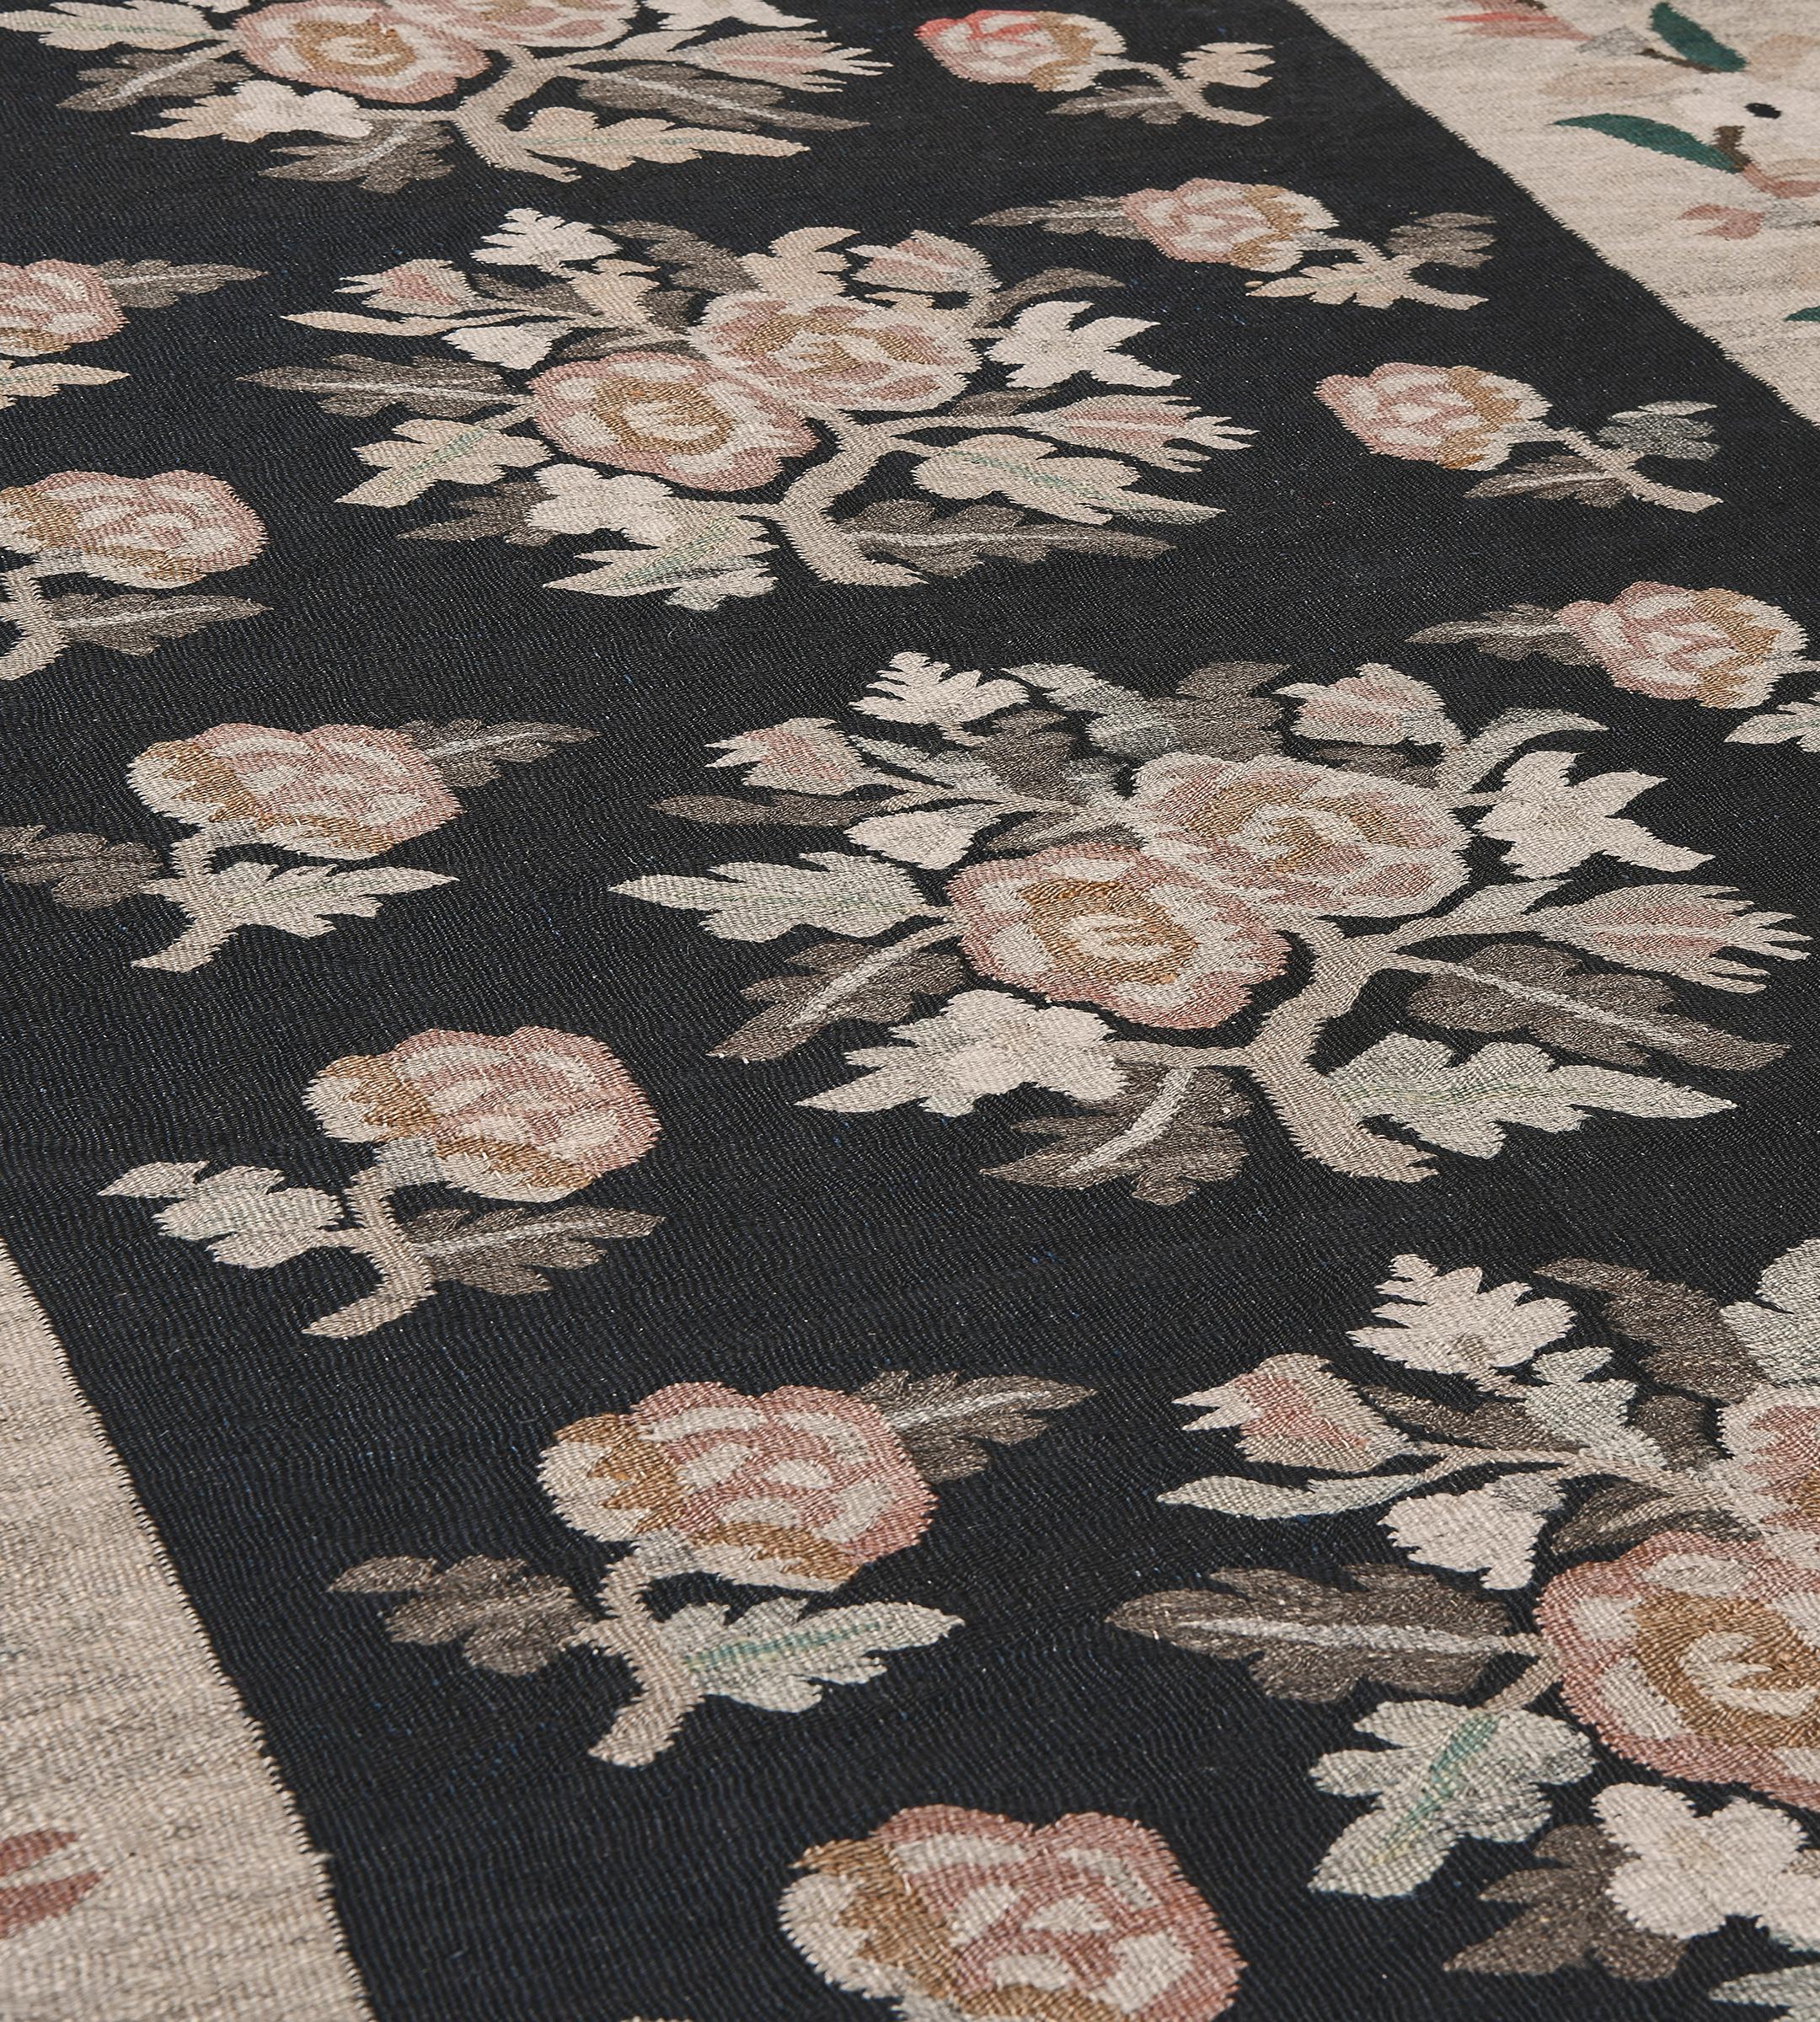 This traditional handwoven Romanian Bessarabian rug has a charcoal-black field with diagonal rows of polychrome floral sprays, in a whimsical sandy-ivory border of angular meandering flowering vines.